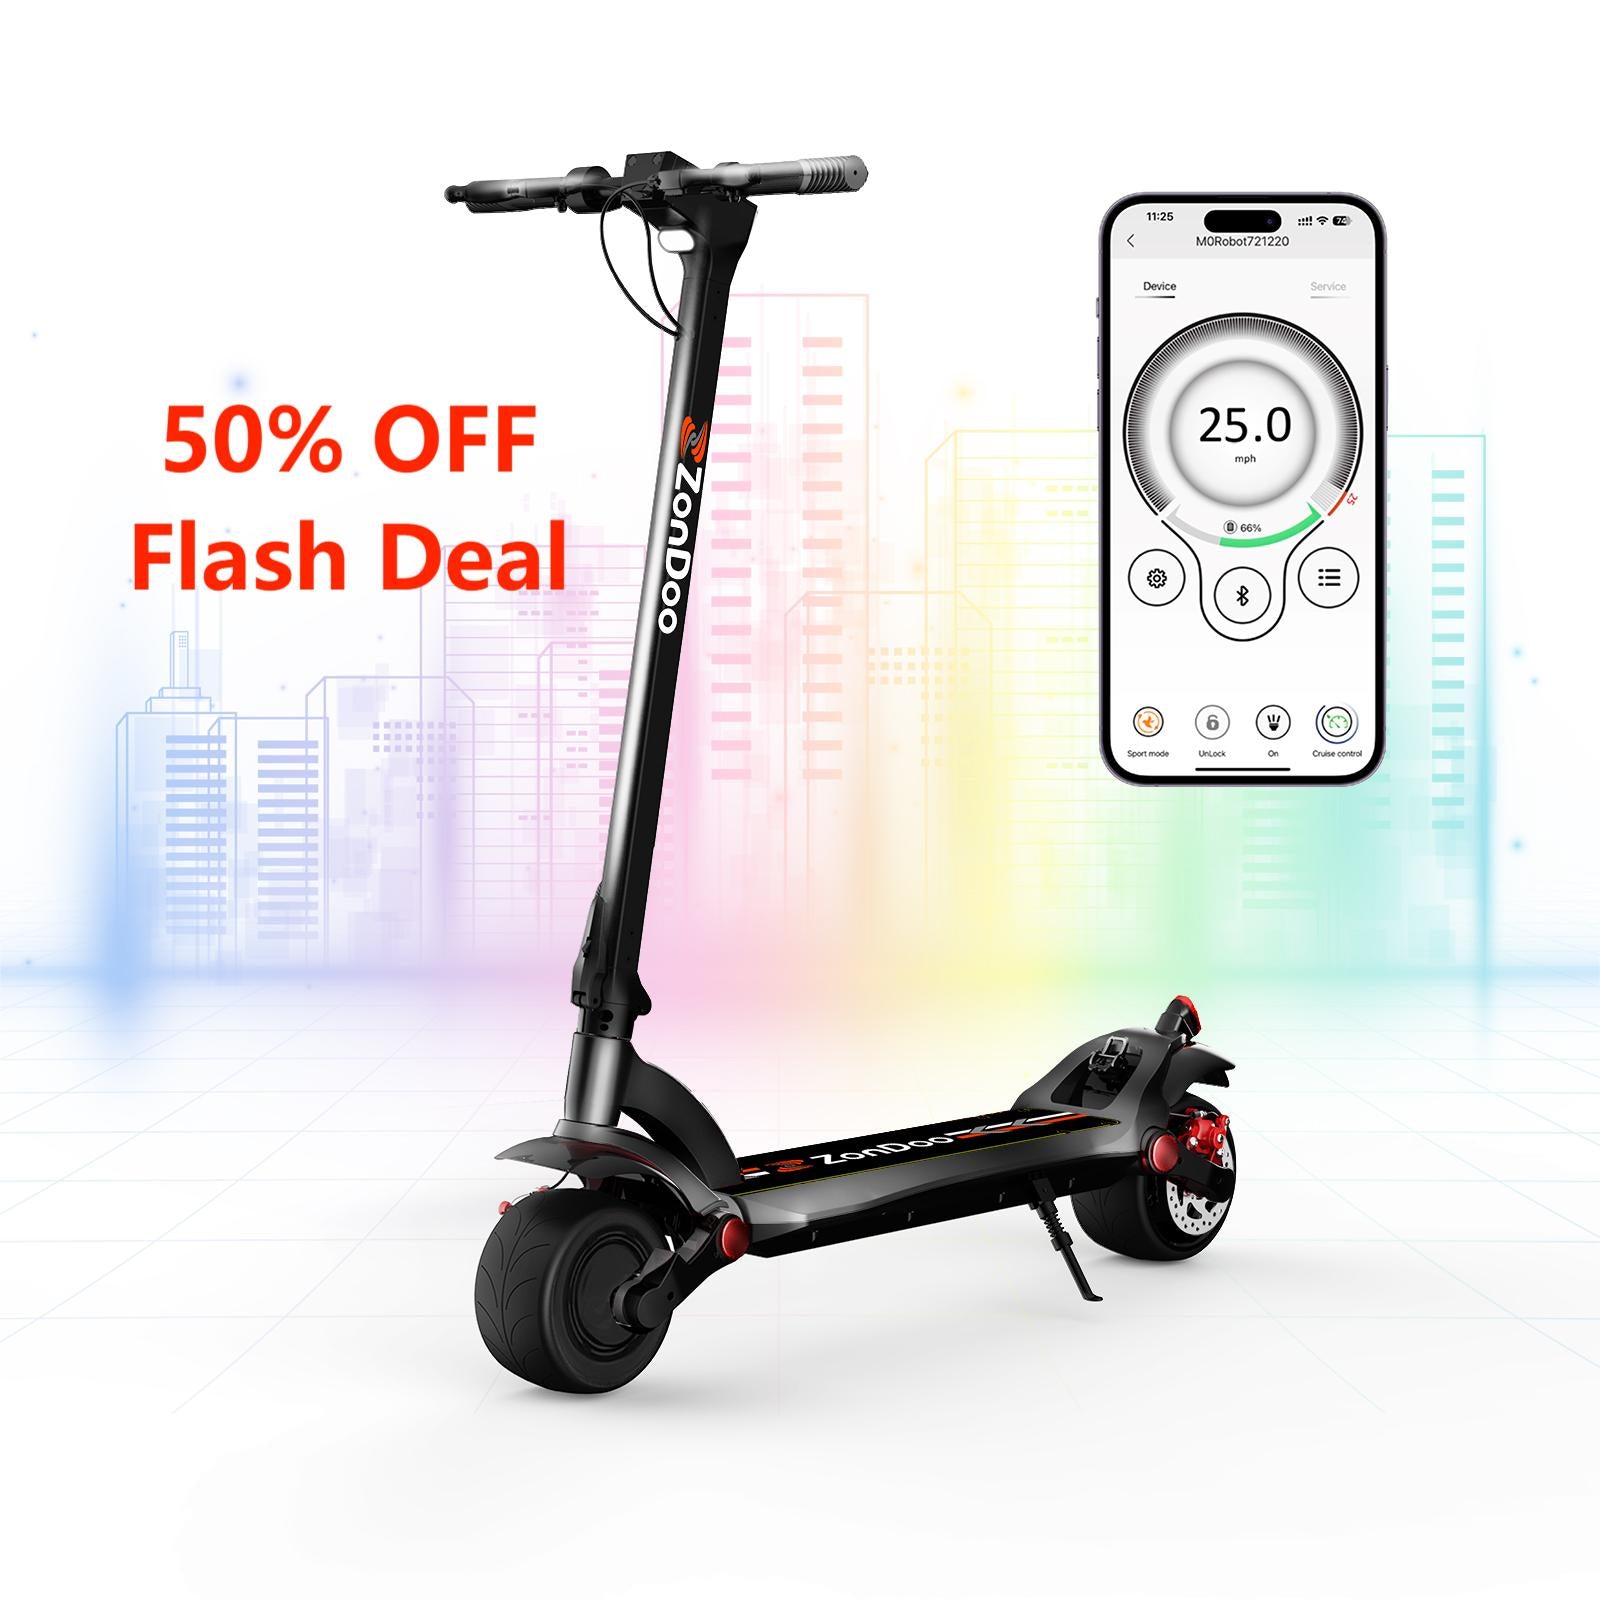 ZonDoo ZU08 Wide Wheel Electric Scooter 25MPH For Commuting